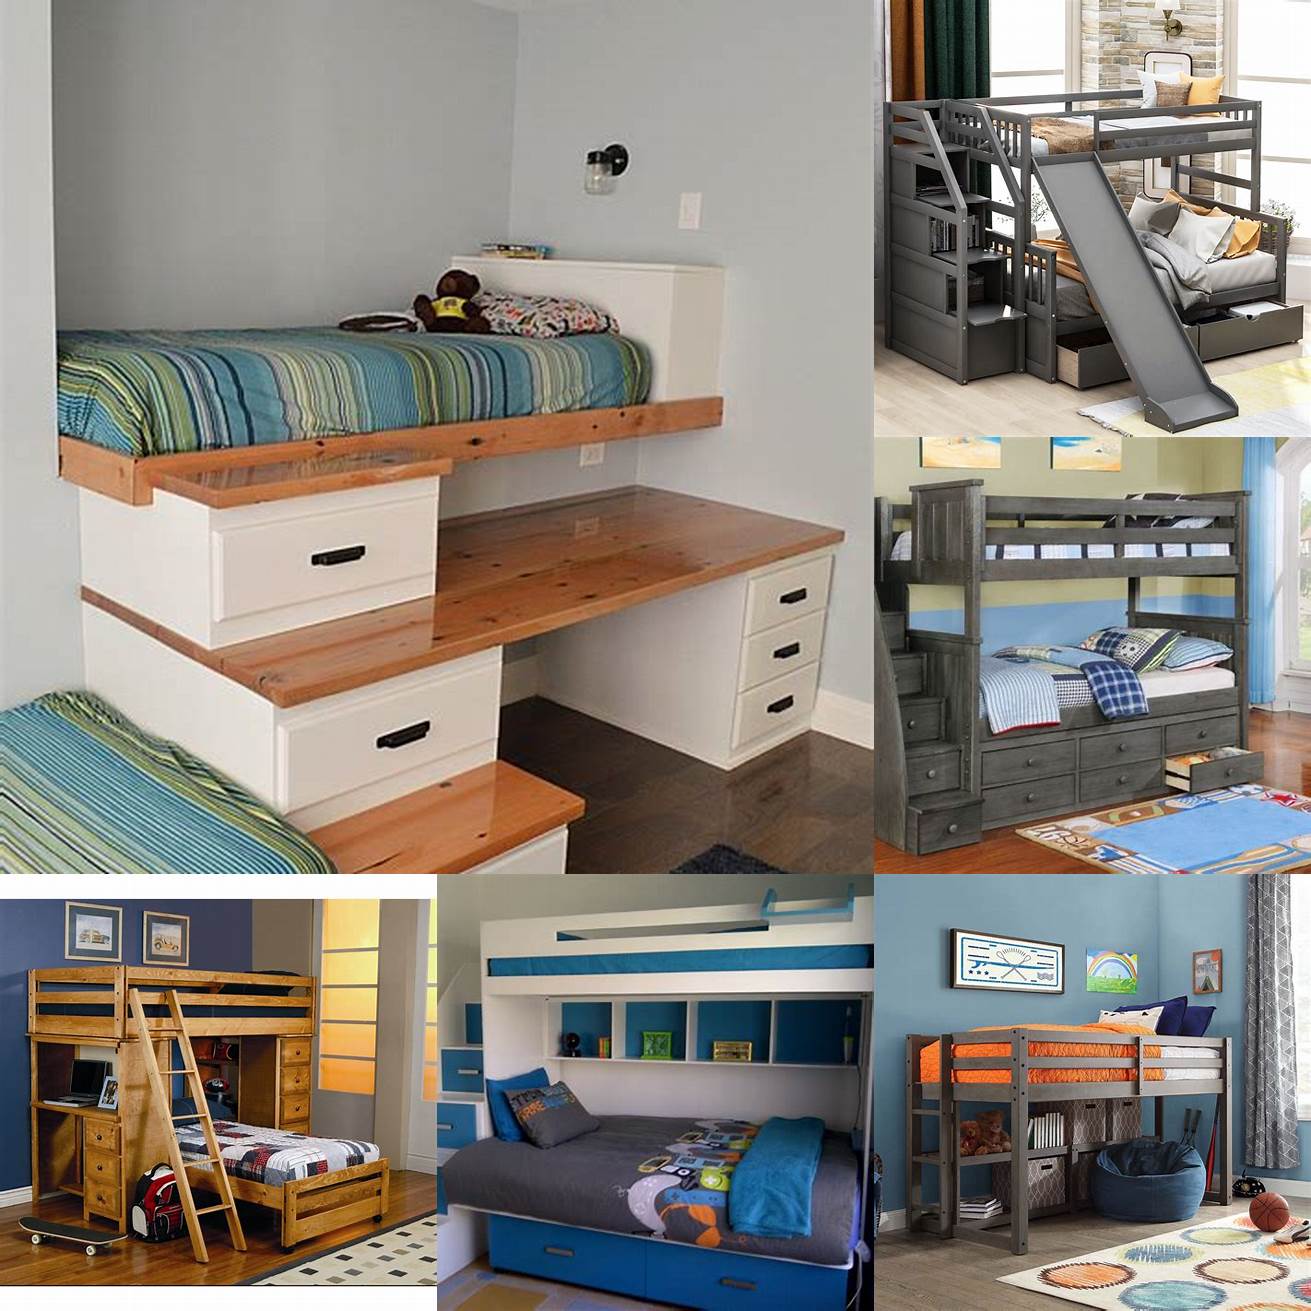 Extra storage Many boys bunk beds come with built-in storage options such as drawers or shelves